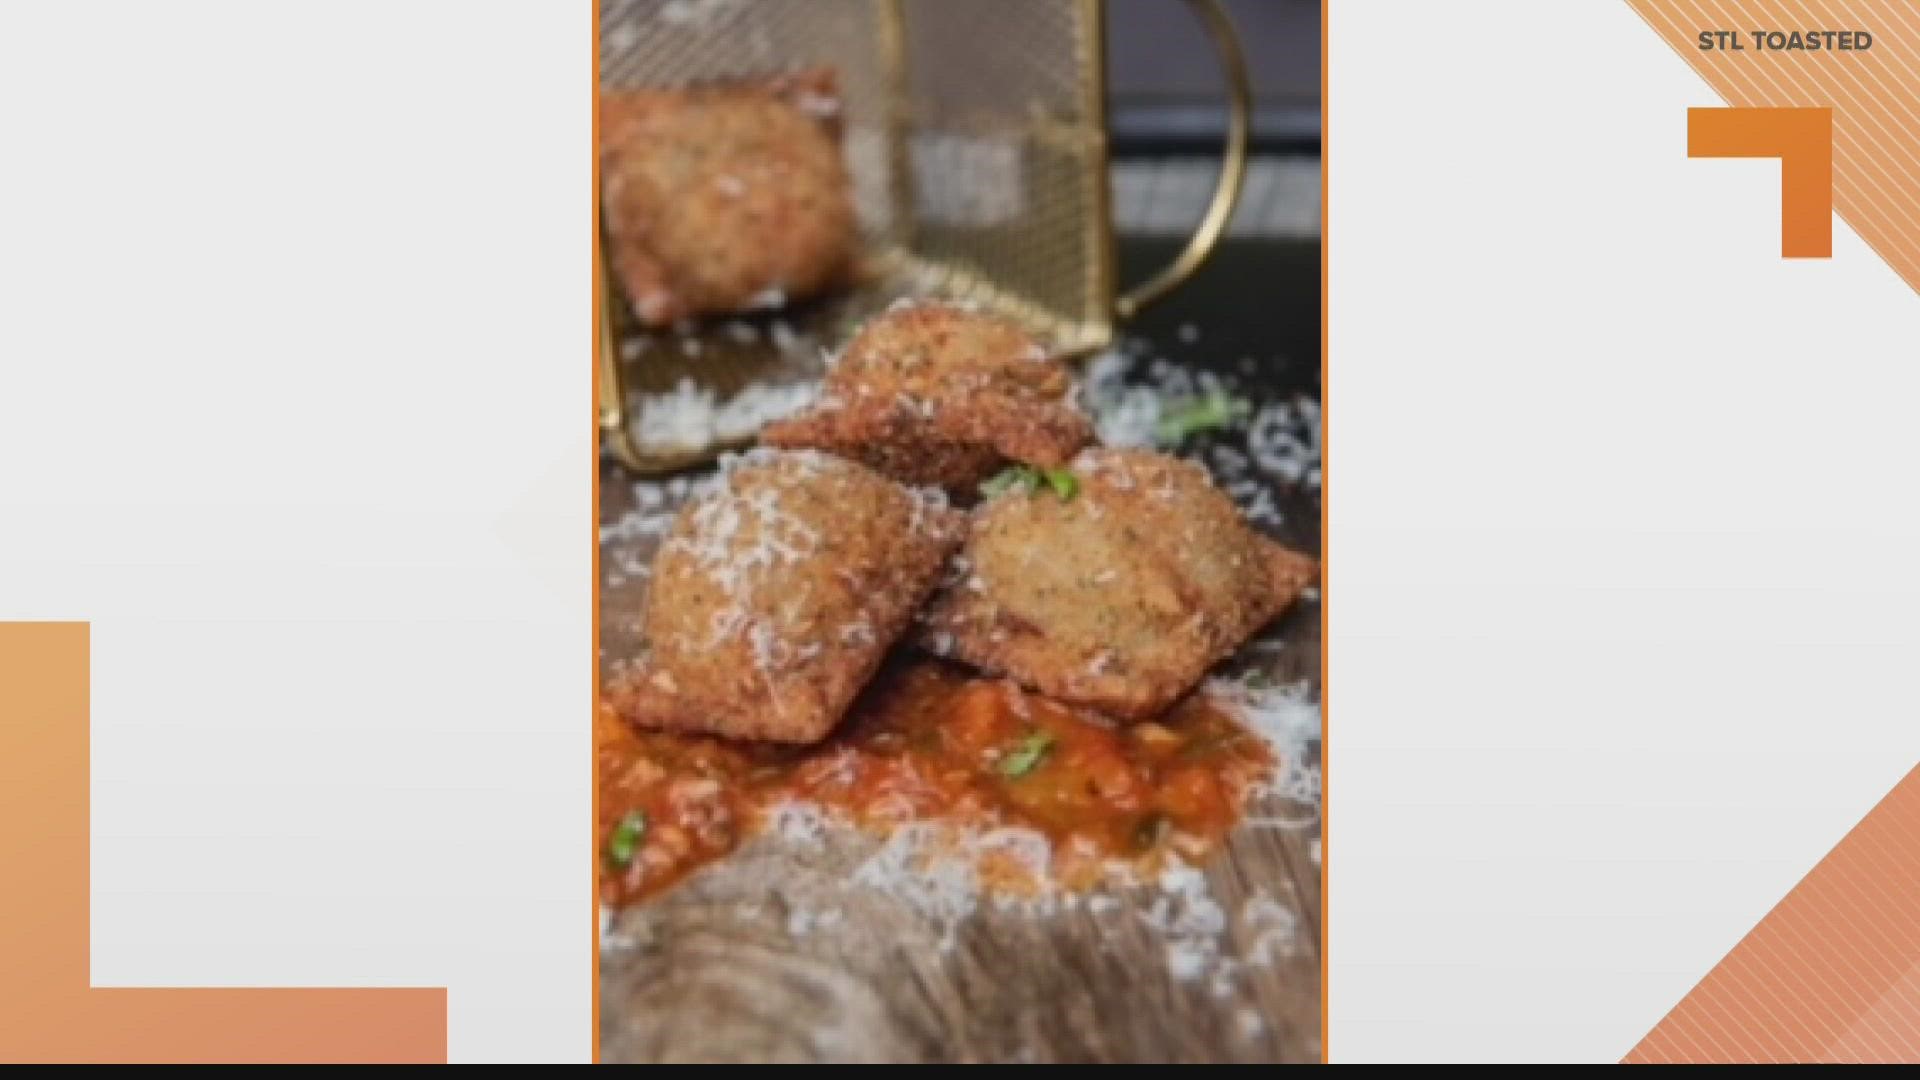 A St. Louis side dish staple is about to take center plate. A toasted ravioli kitchen is coming soon to the city!